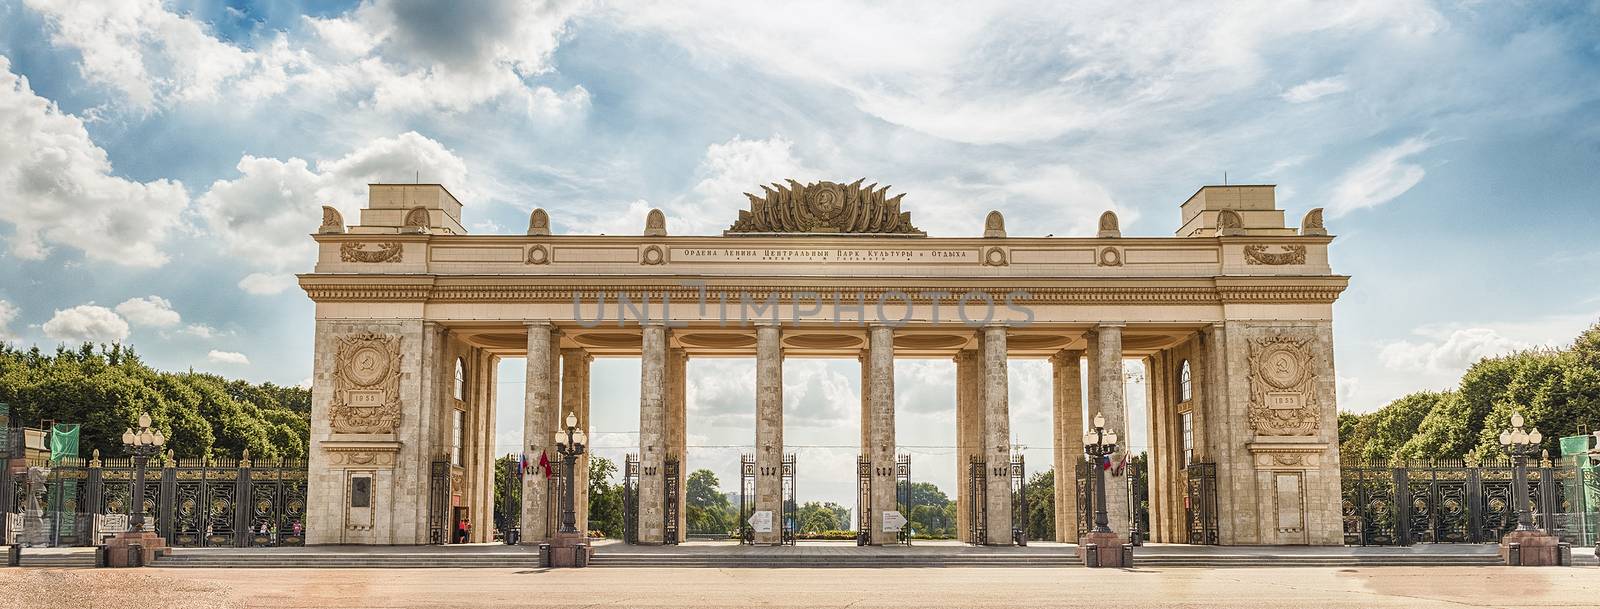 Main entrance gate of the Gorky Park, Moscow, Russia by marcorubino